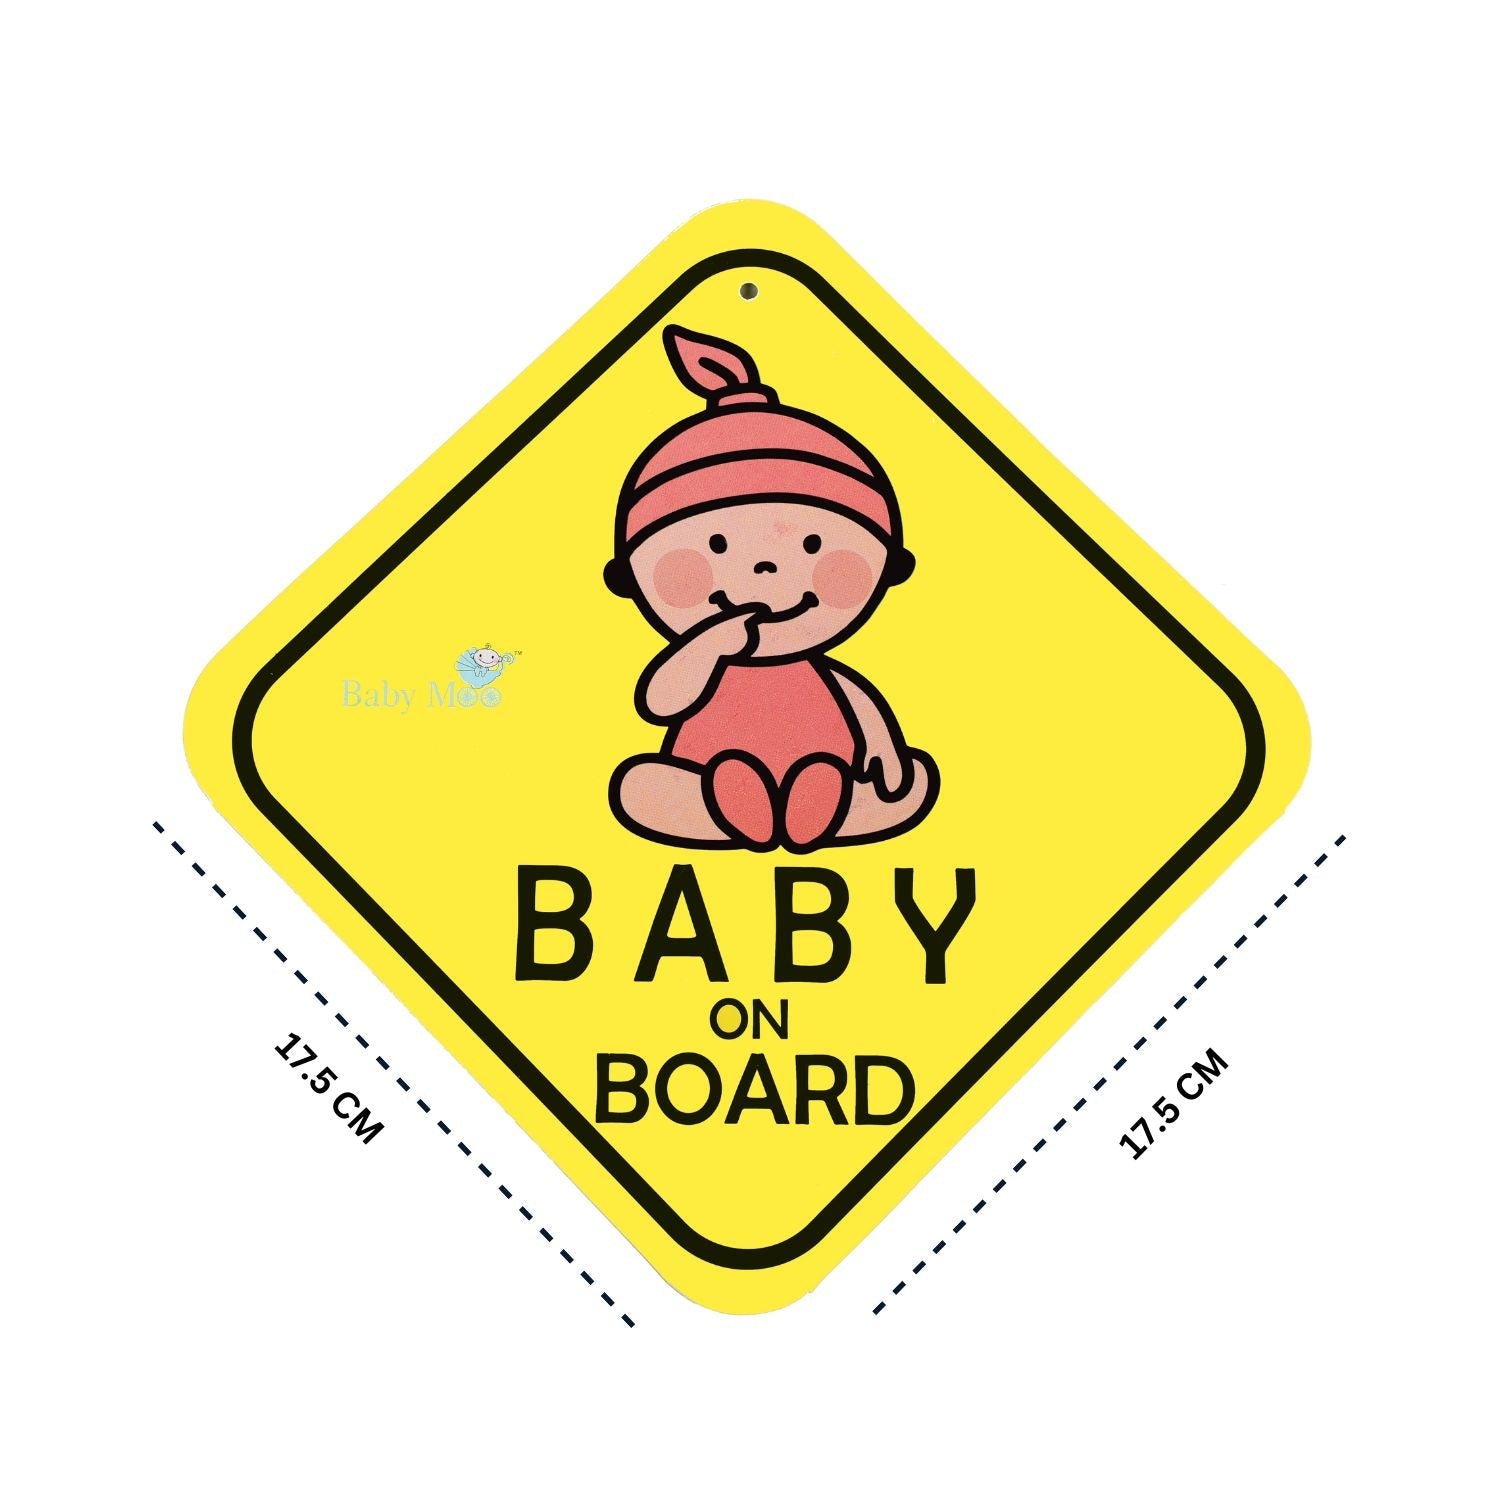 Baby Moo Infant Car Safety Sign Board With Vacuum Suction Cup Clip - Yellow